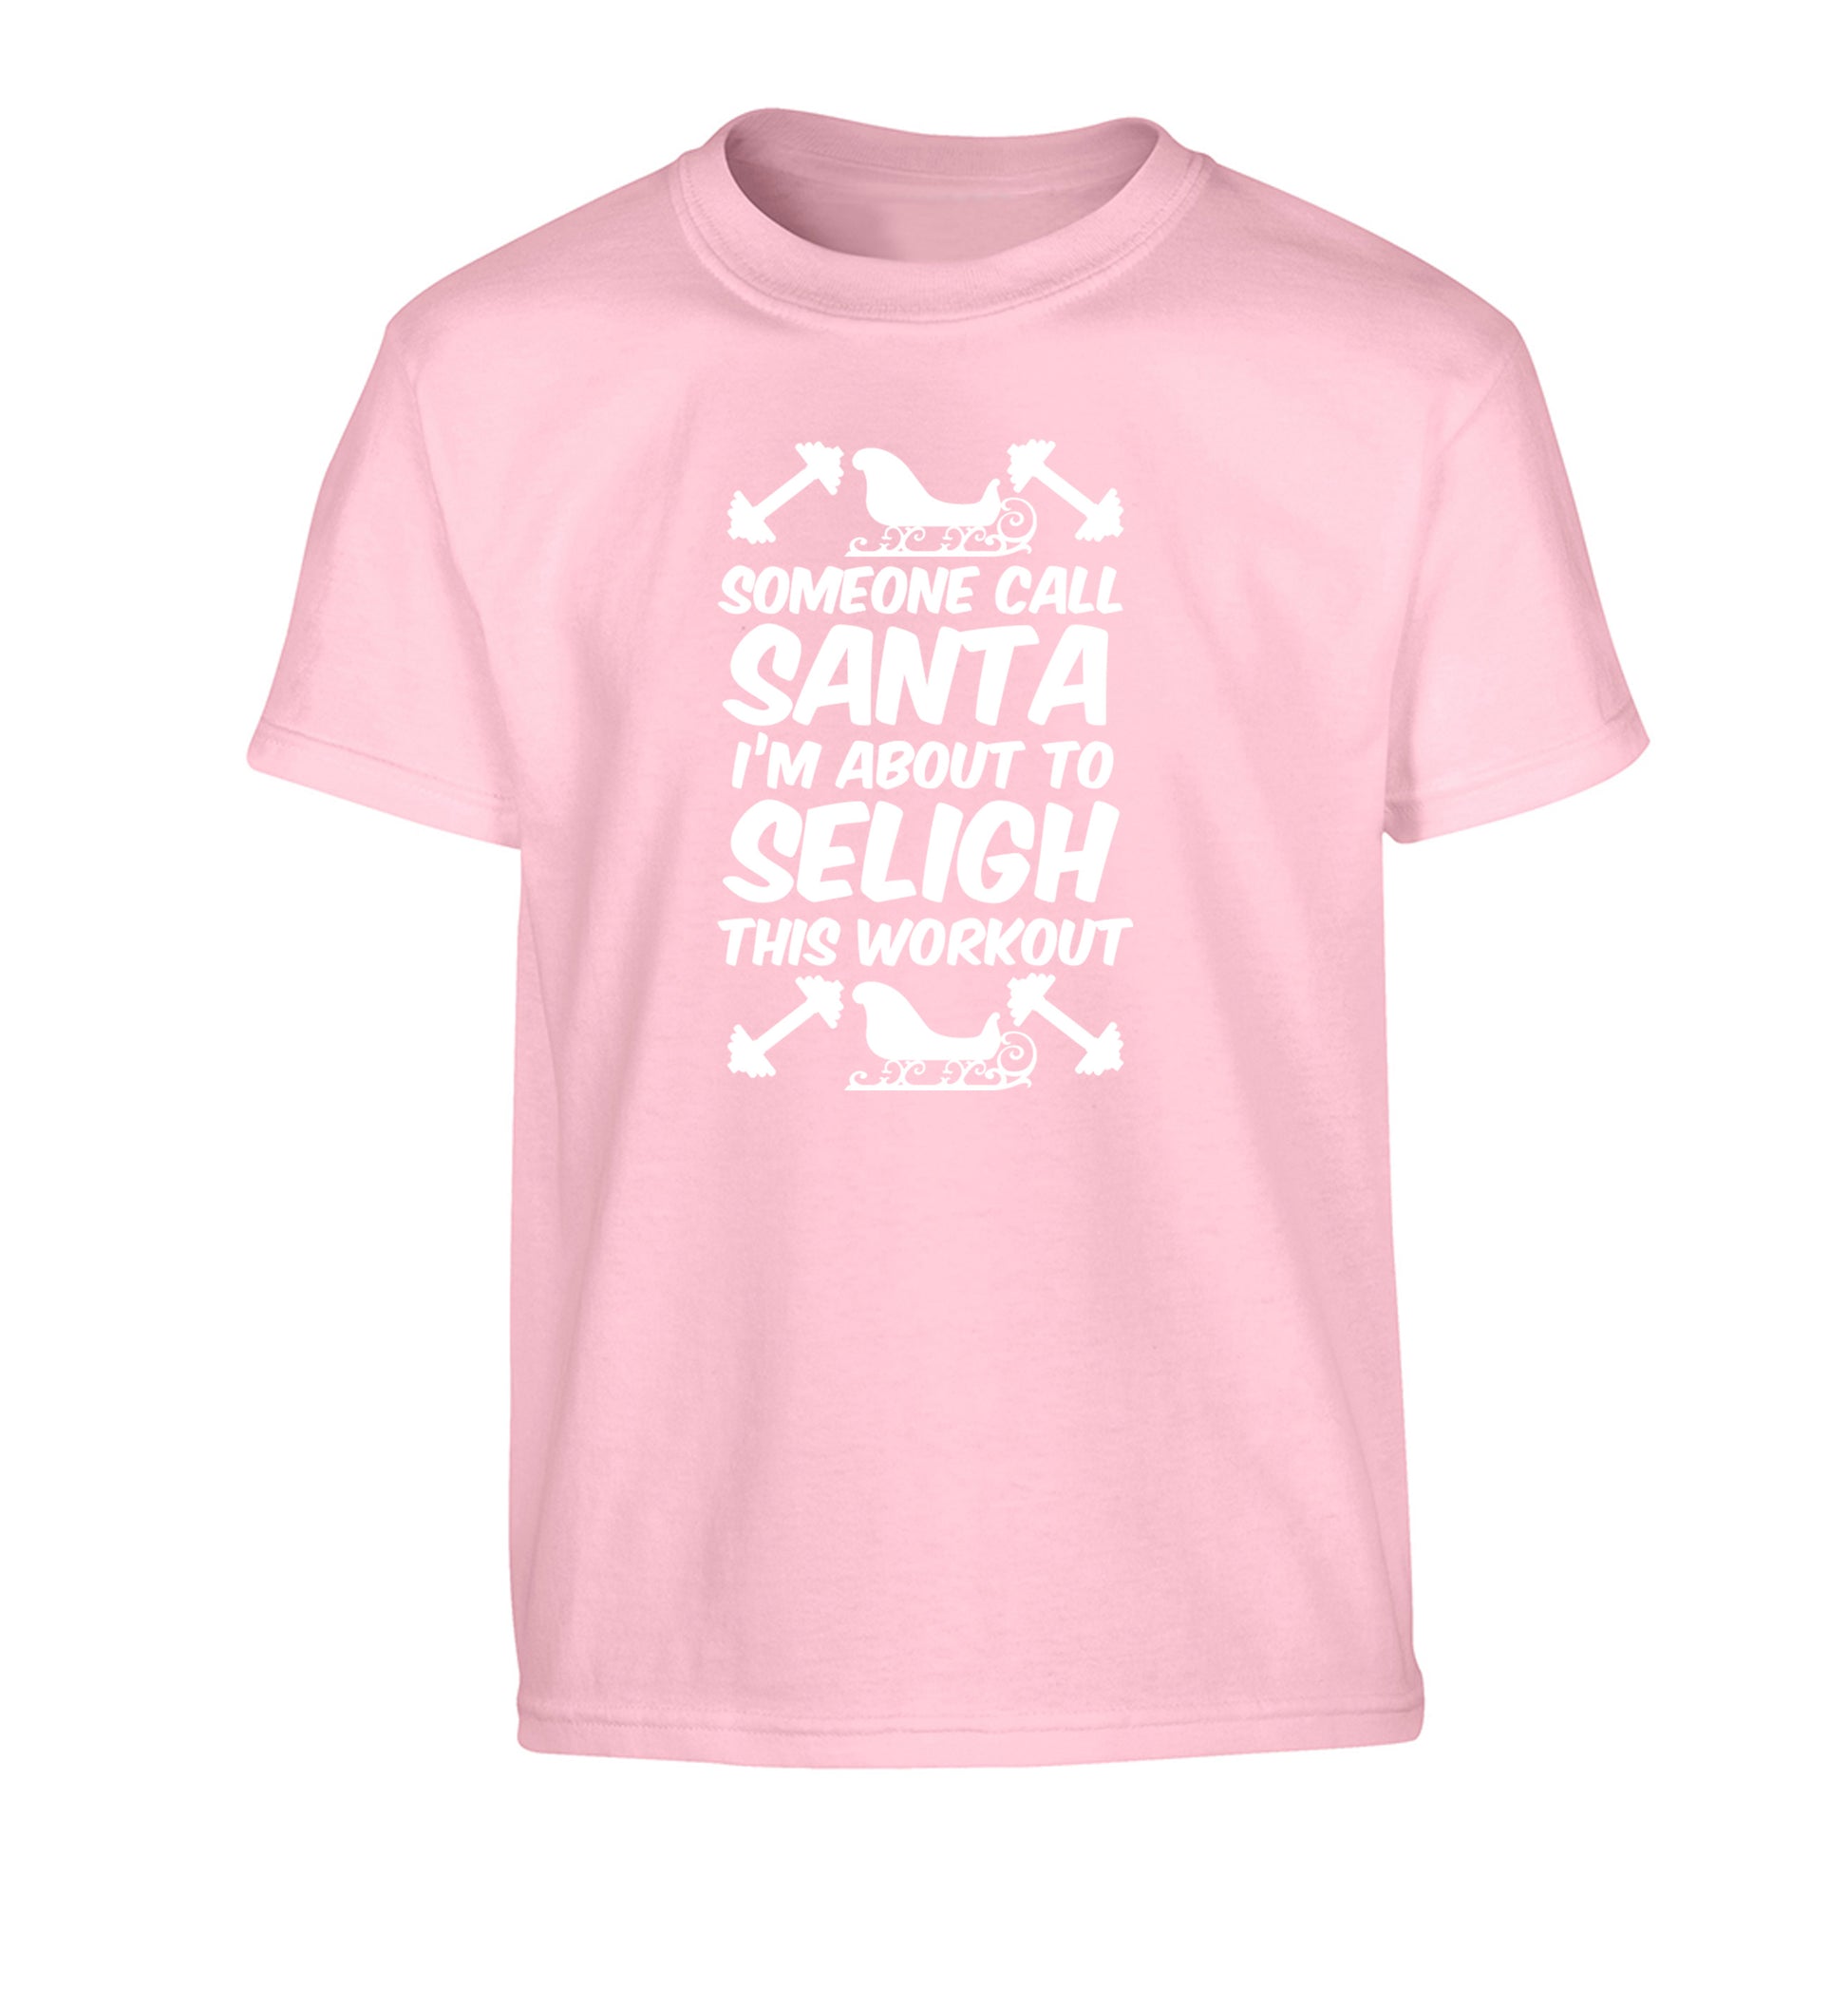 Someone call santa, I'm about to sleigh this workout Children's light pink Tshirt 12-14 Years